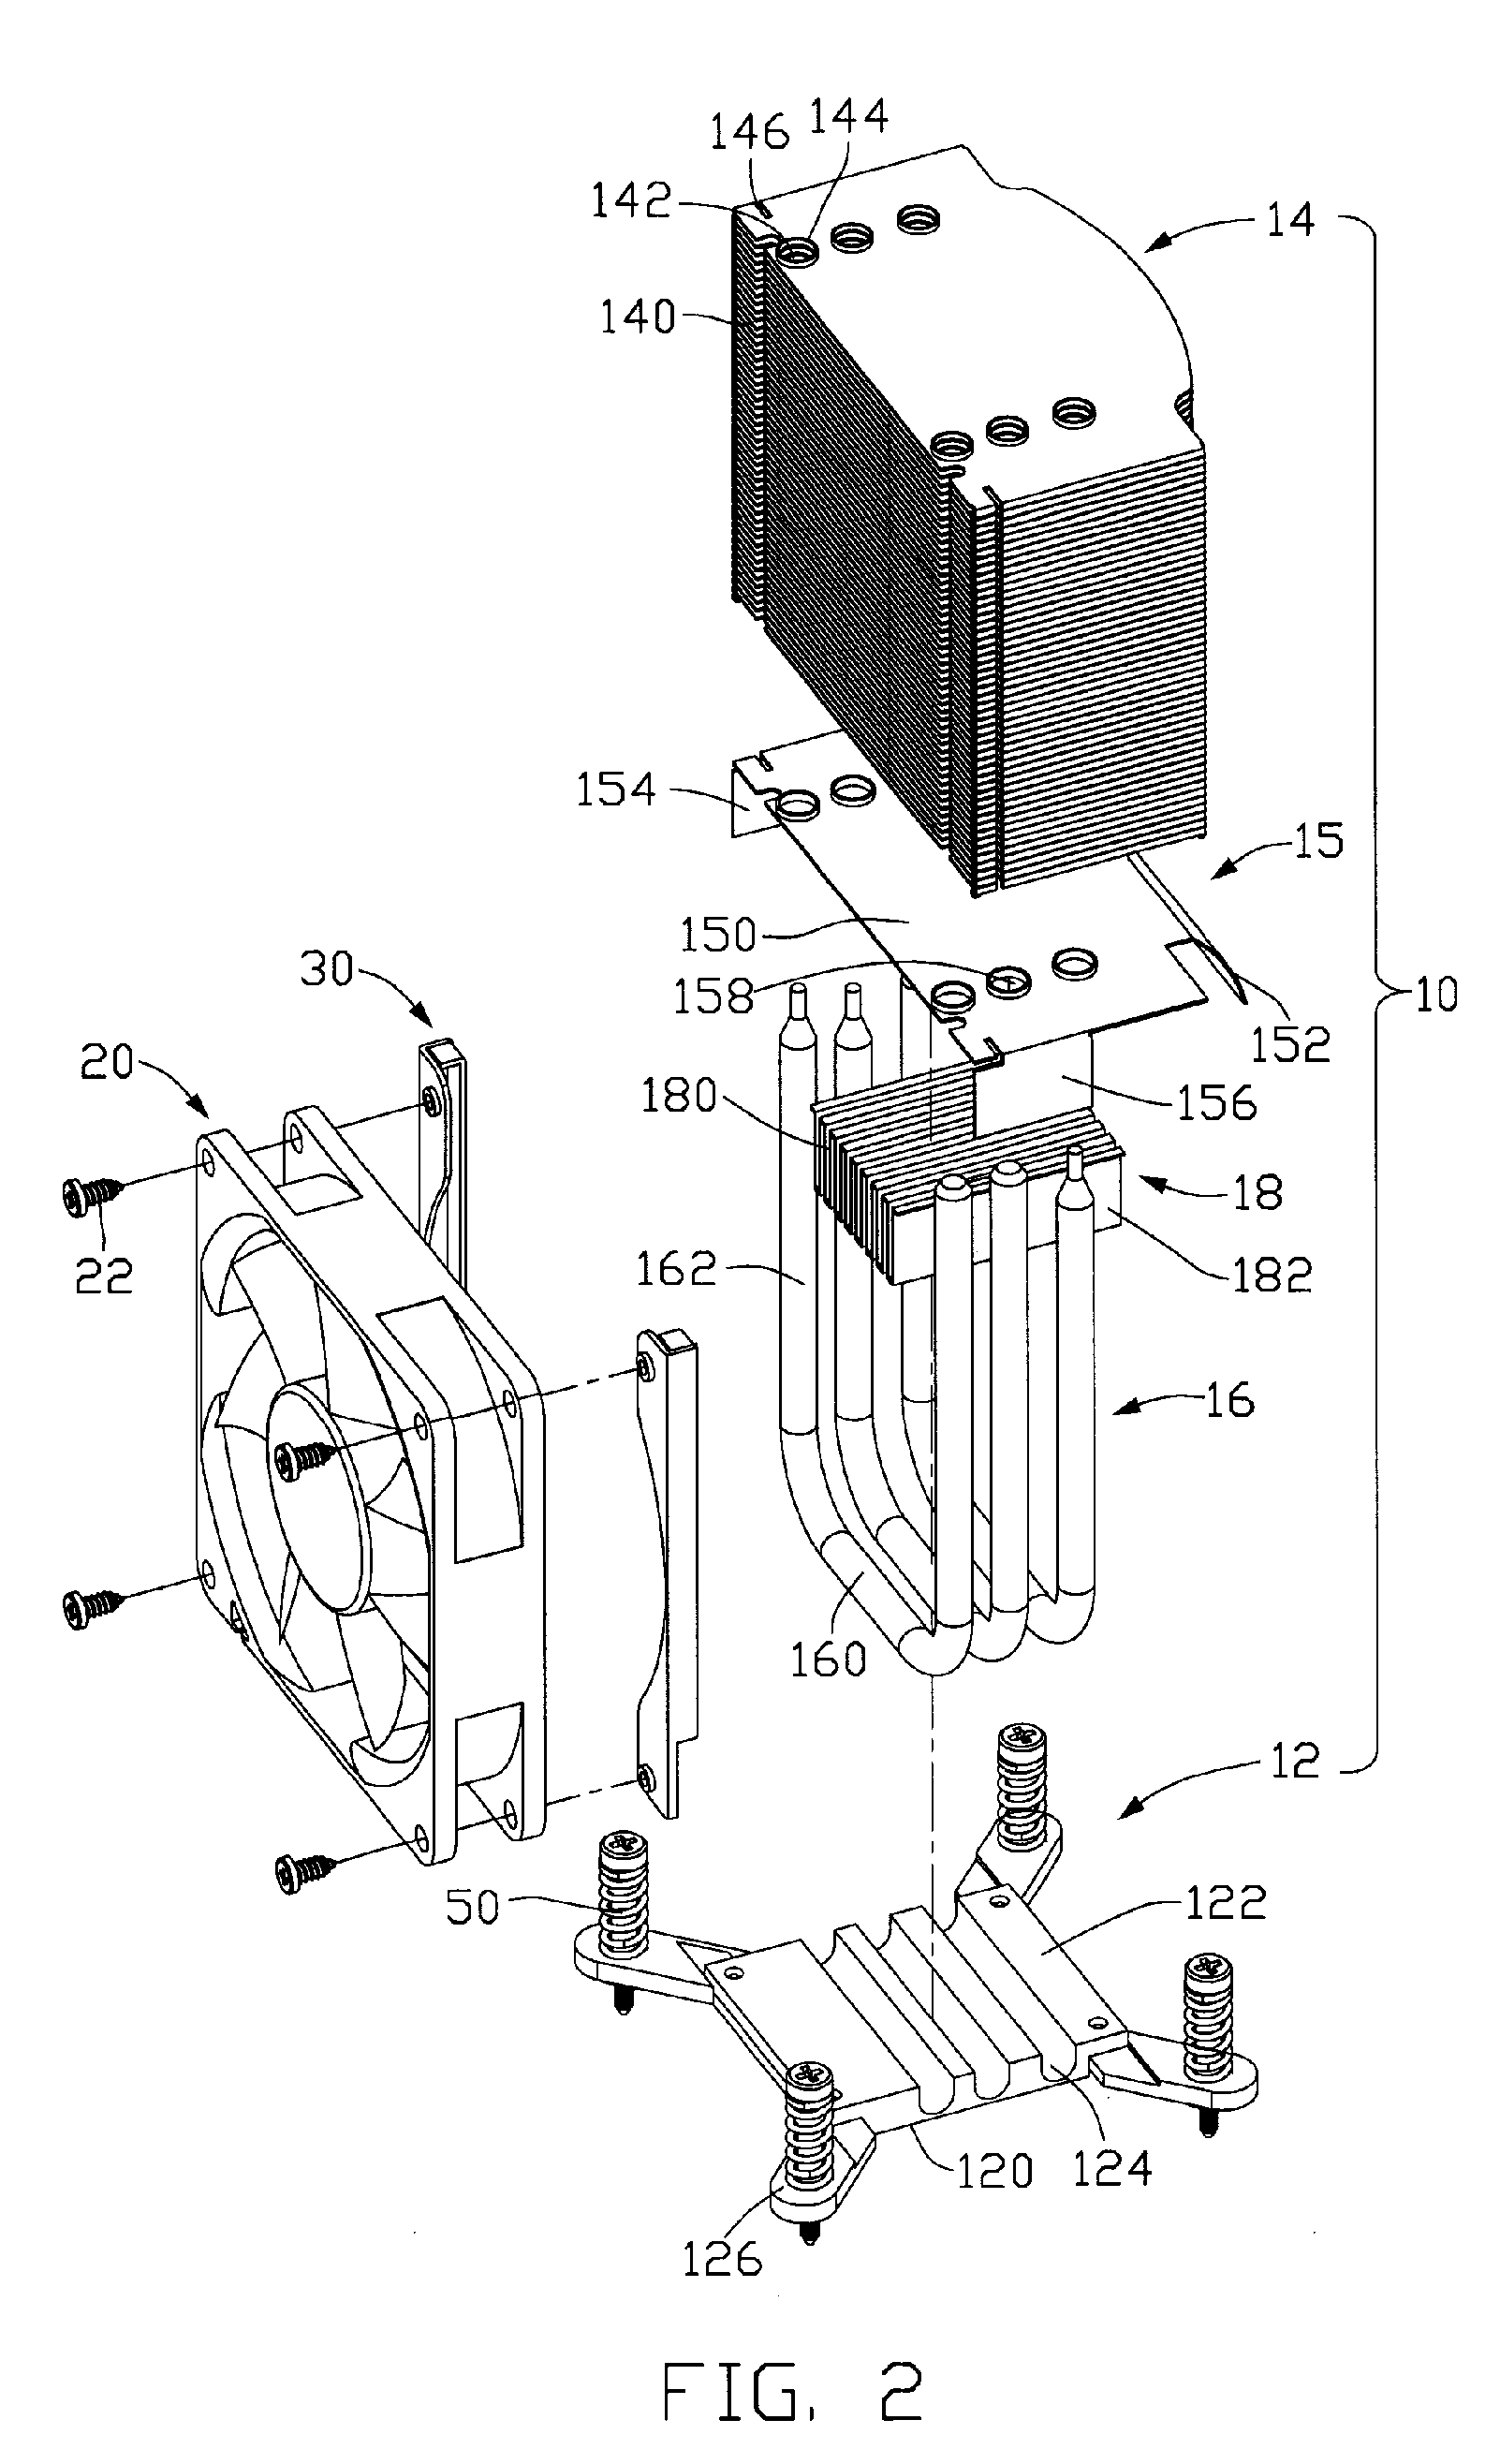 Heat dissipating device having a fin also functioning as a fan duct